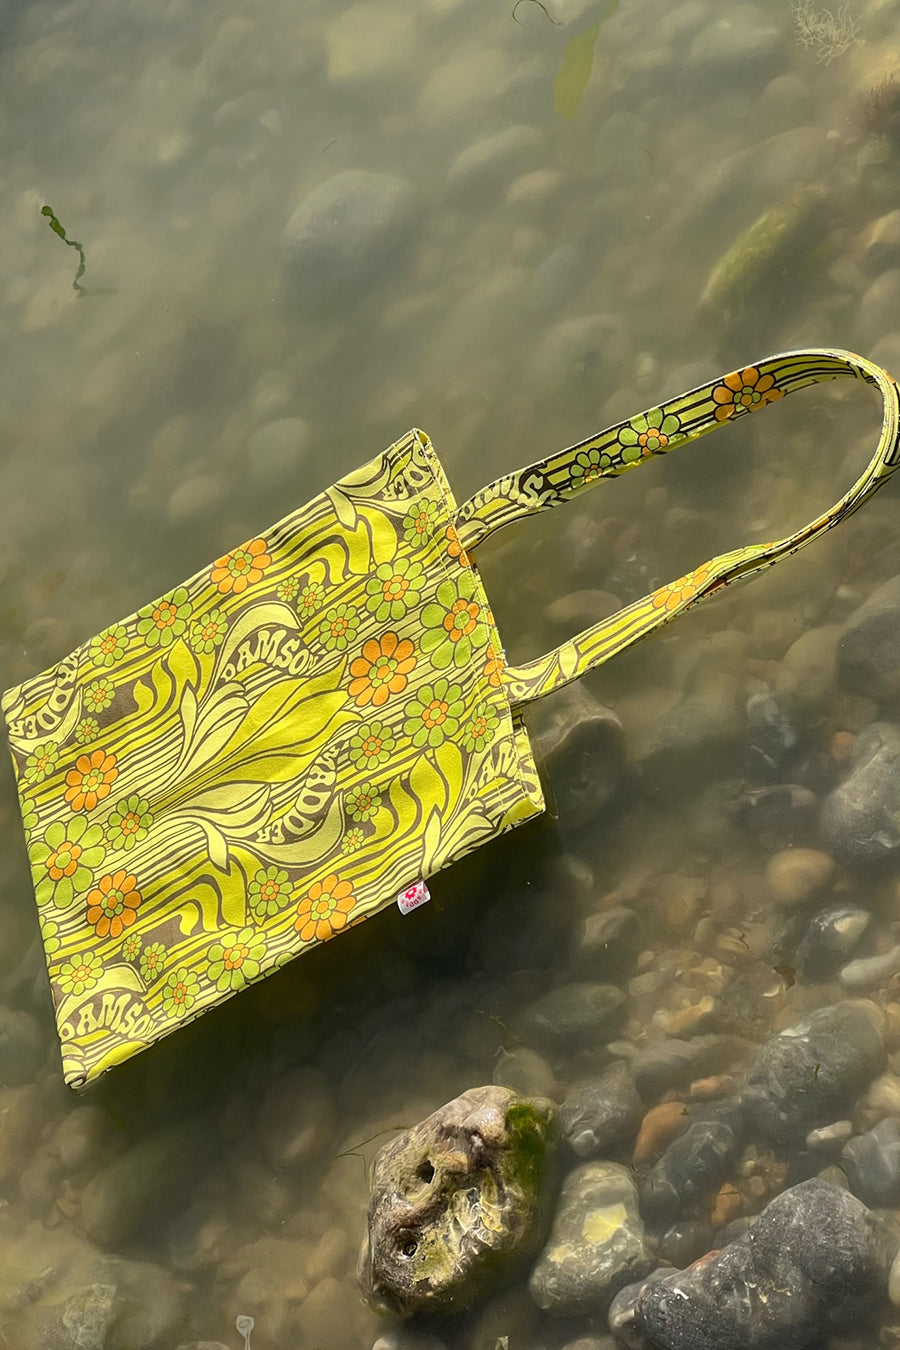 SMALL TOTE BAG IN YELLOW 70S FLORAL PRINT